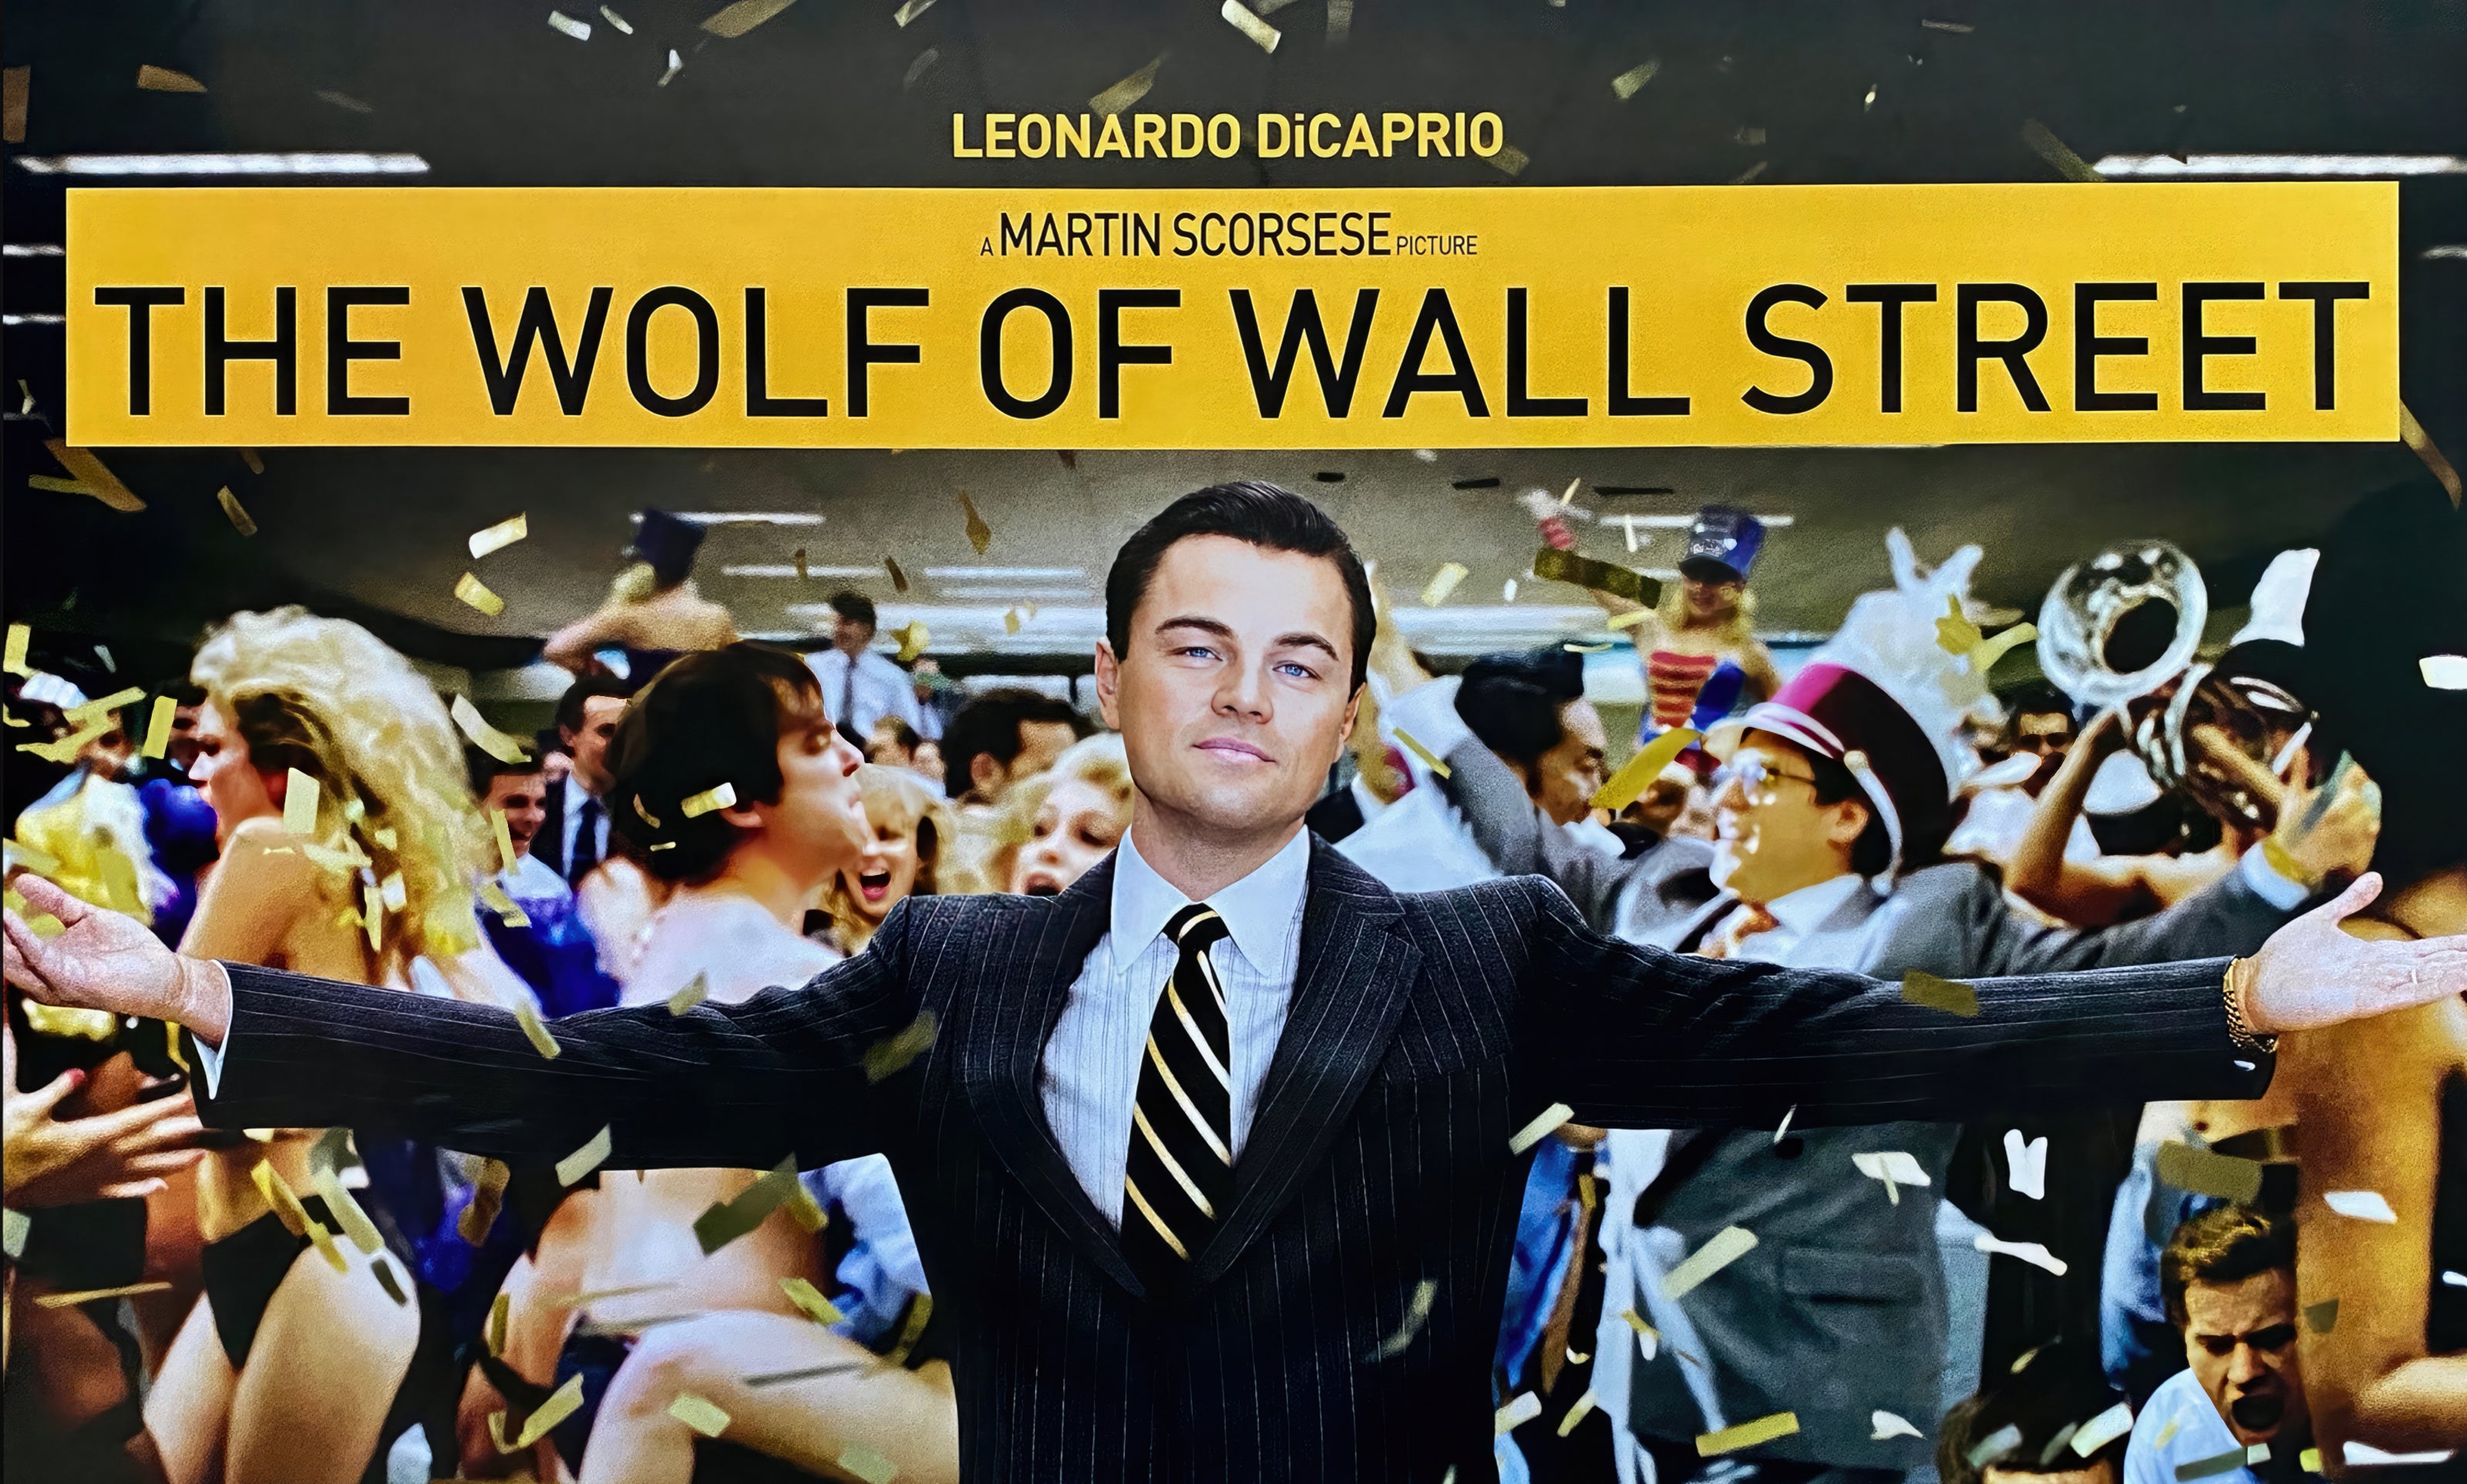 The Wolf of Wall Street Script Screenplay - Image of Movie Film Poster